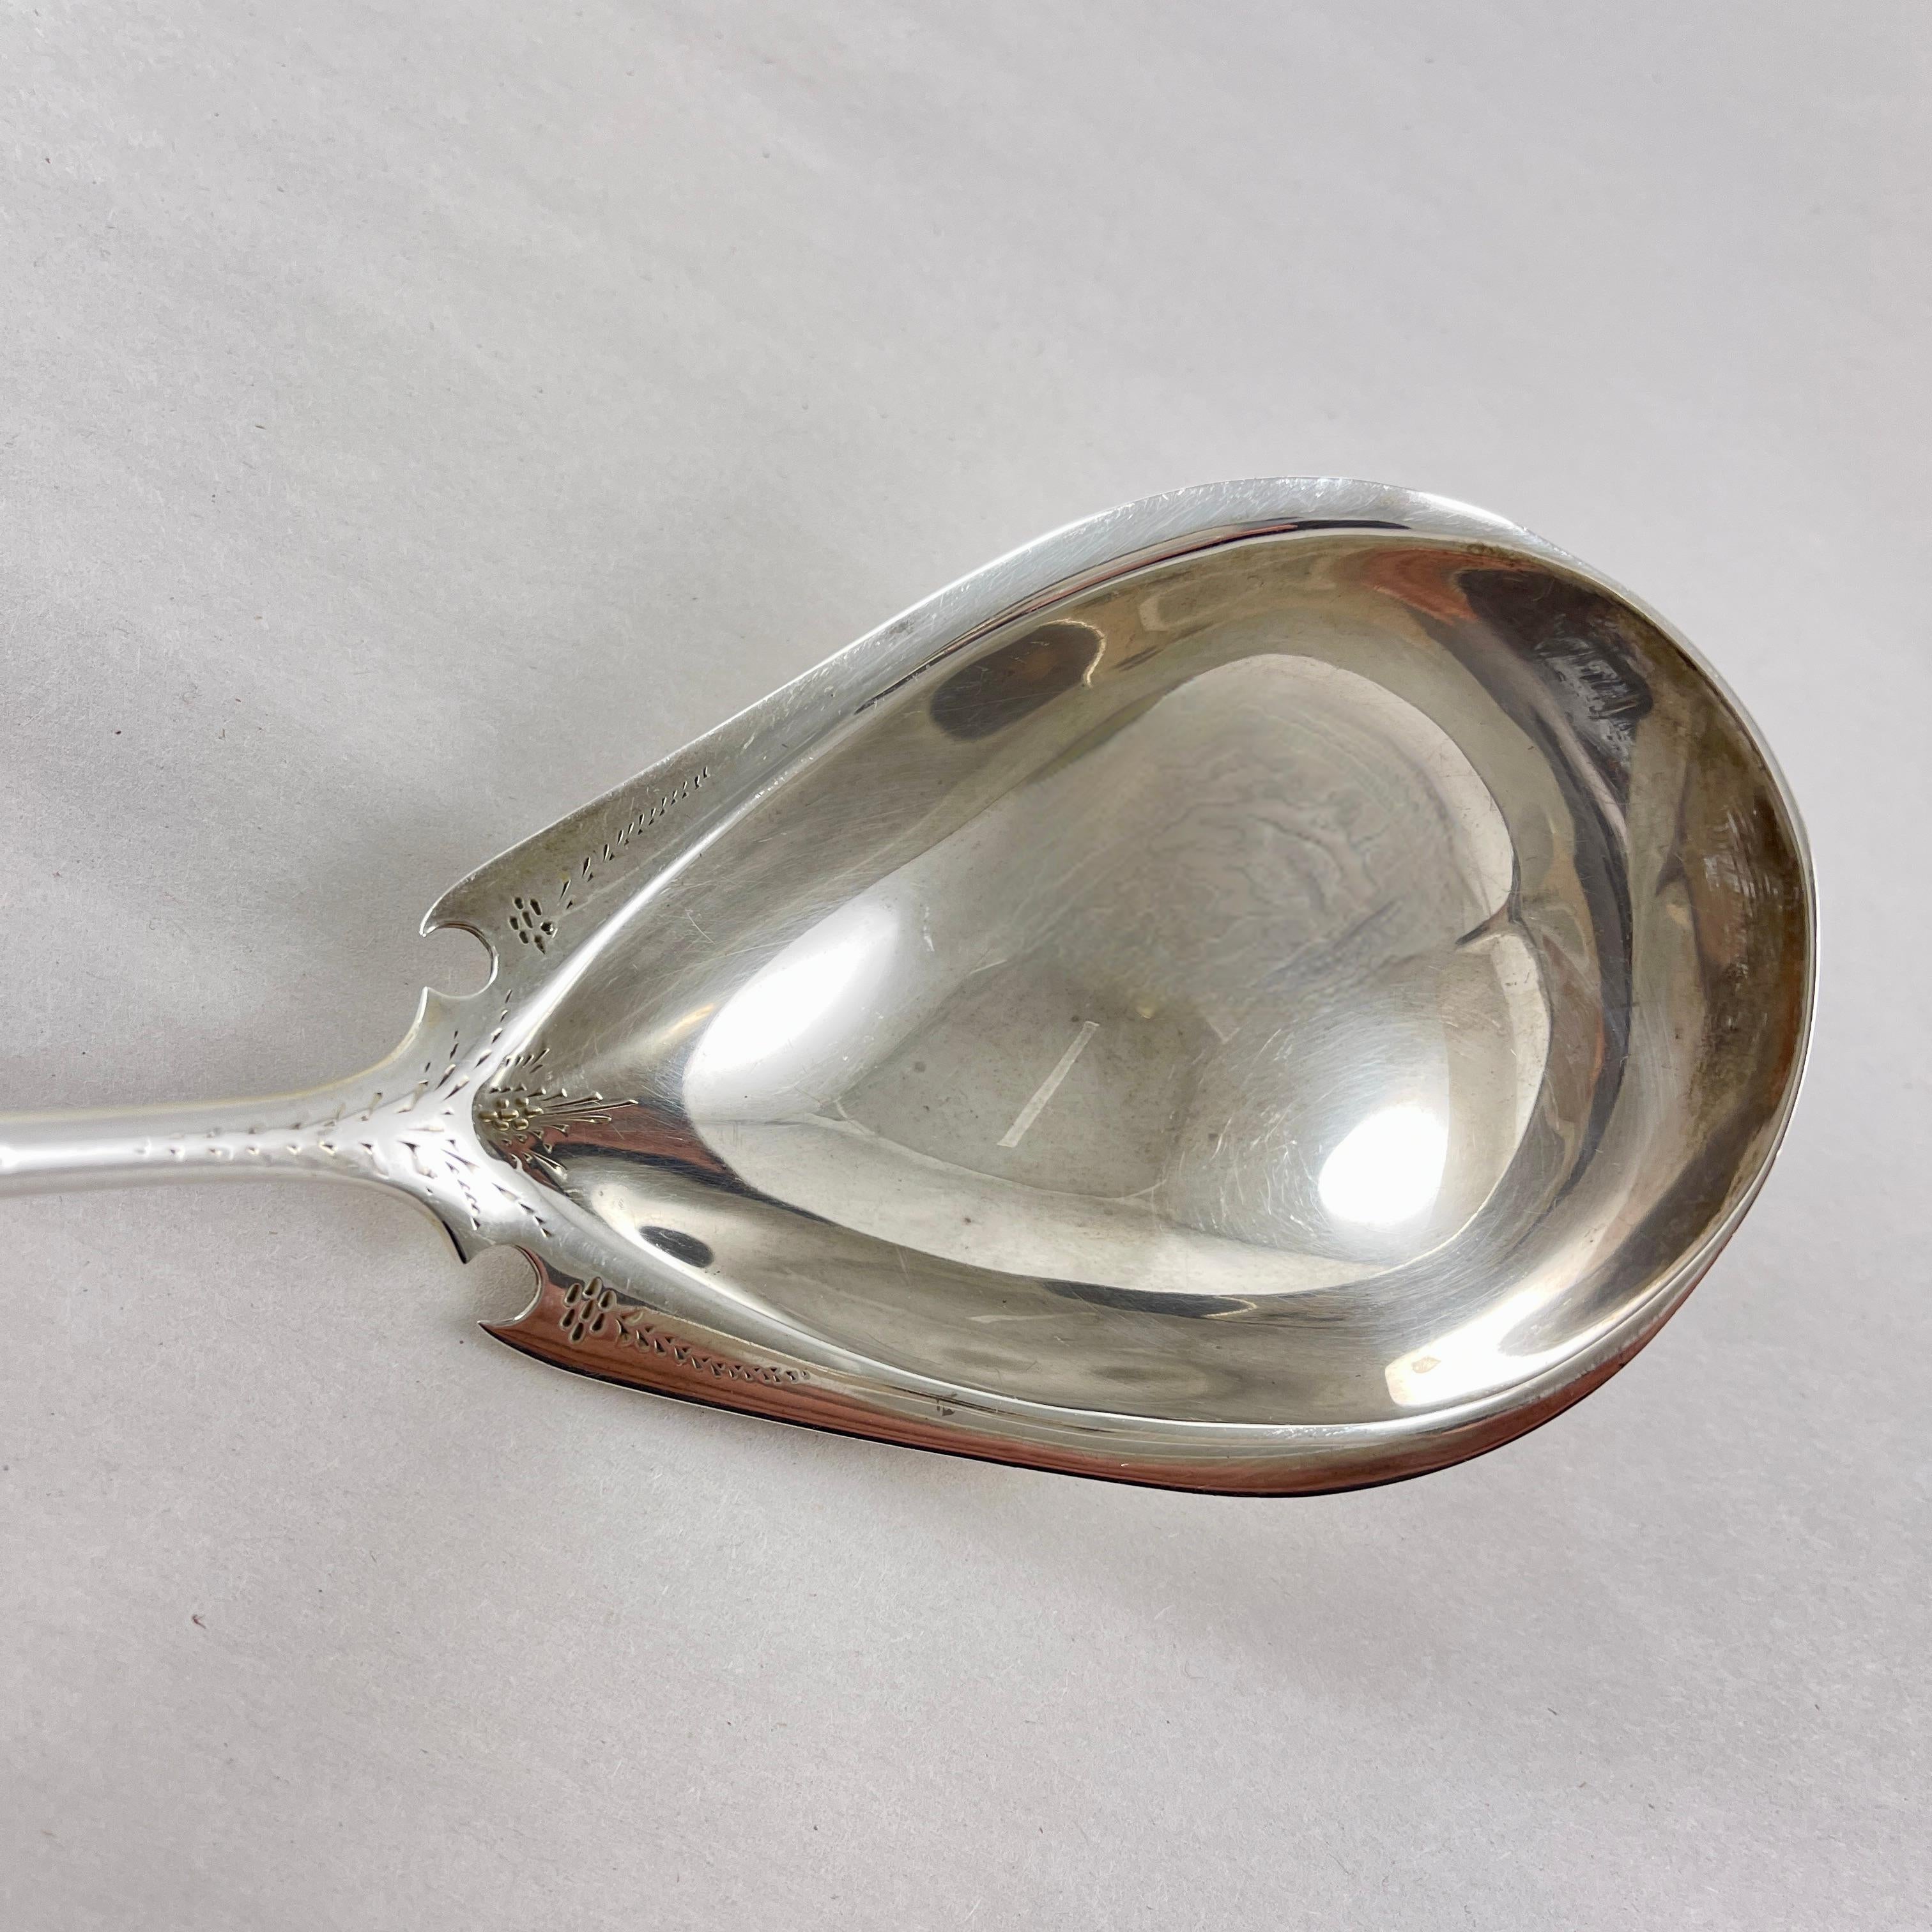 Bailey & Co. Estate Sterling Silver Hand Made Ladle, circa 1850 For Sale 2